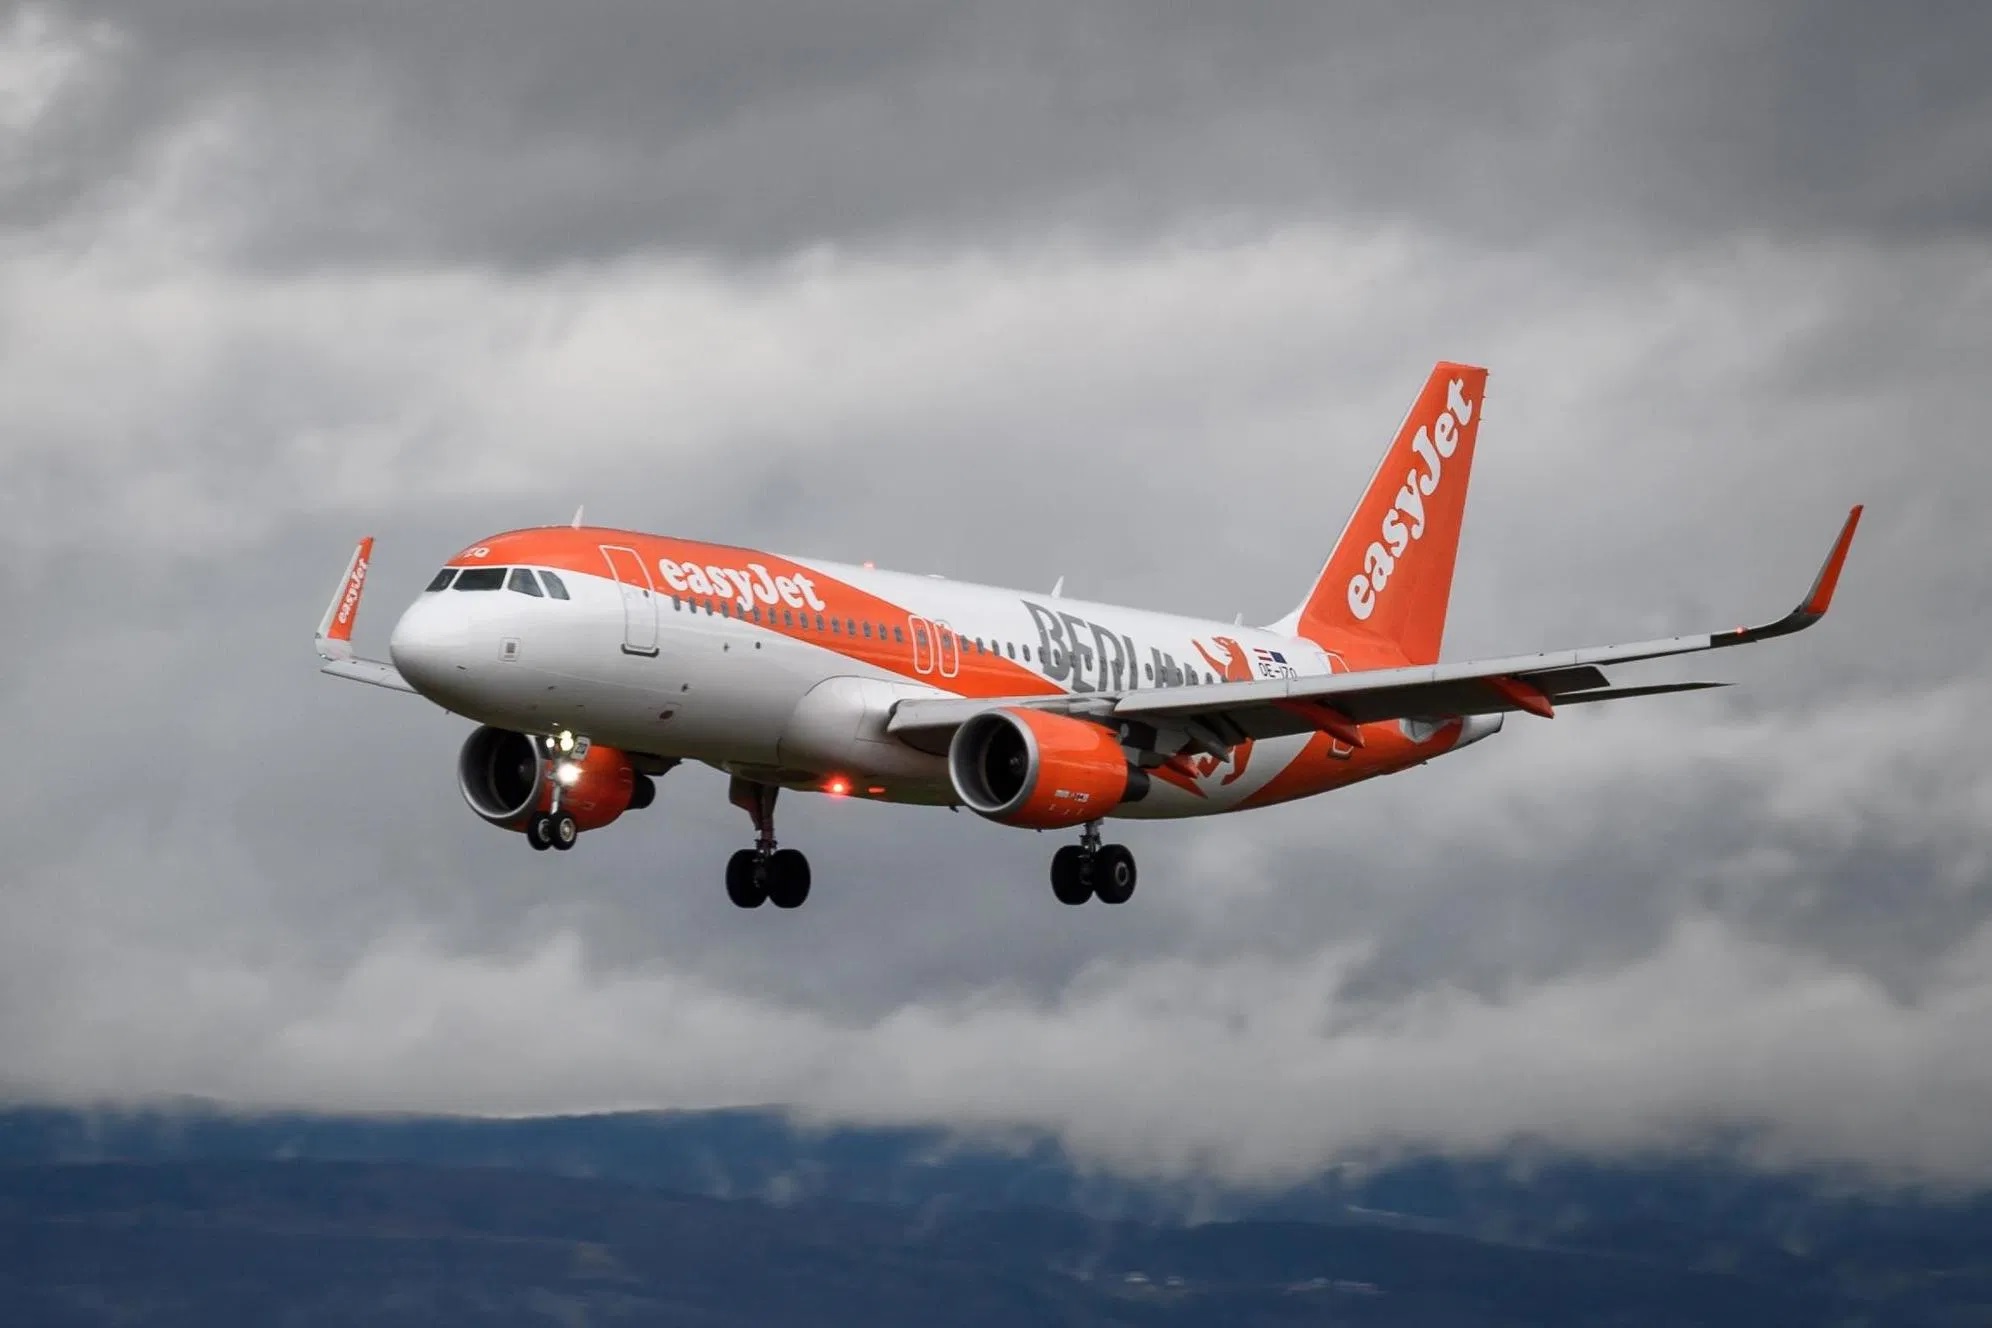 EasyJet's attack: When cybercriminals take it to heart